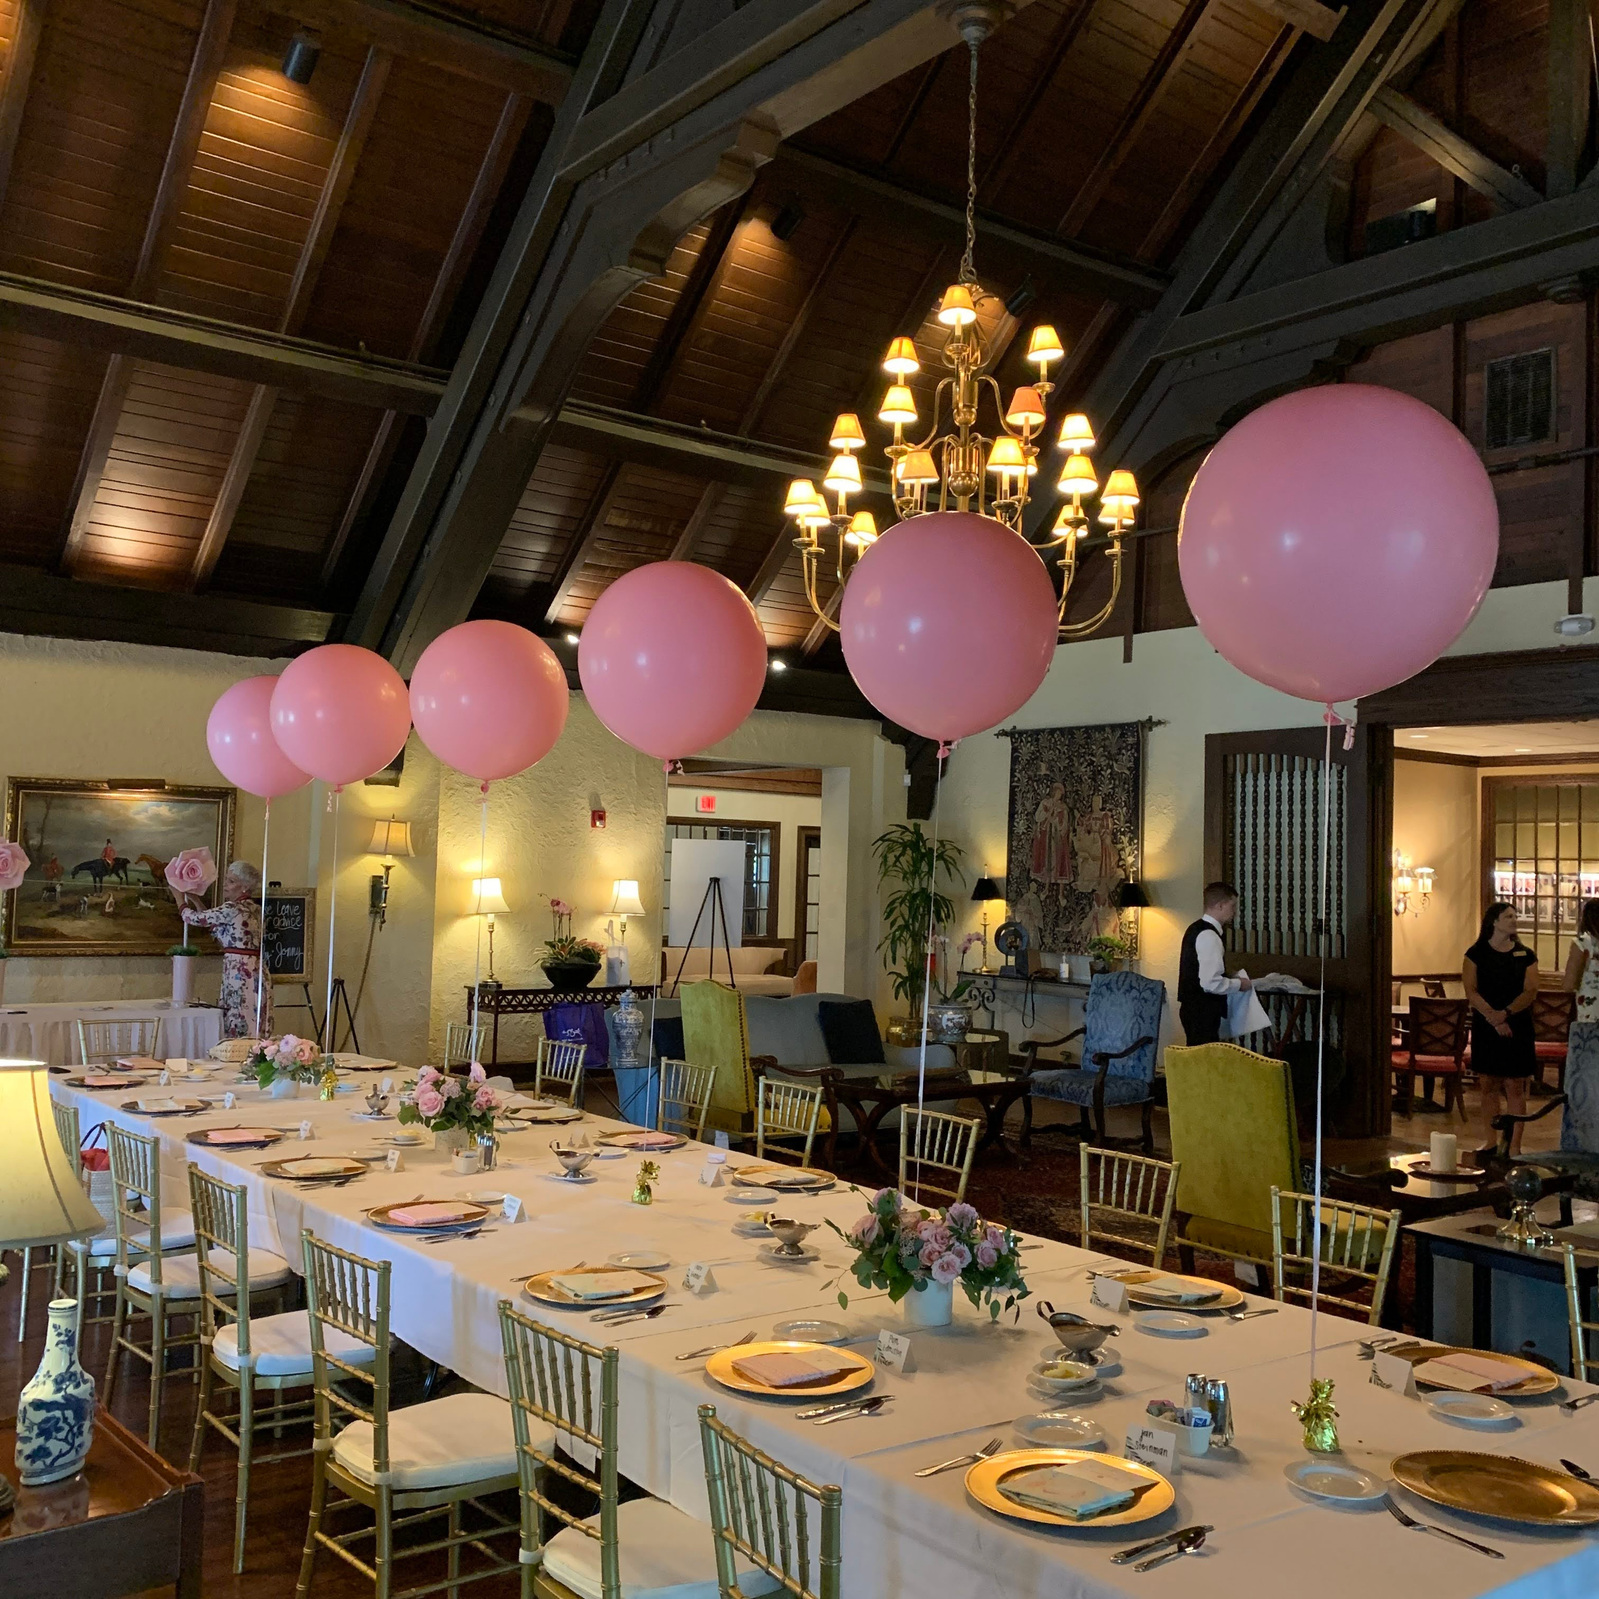 In an event space is a long table with a white tablecloth and place settings with centerpieces of pink helium balloons